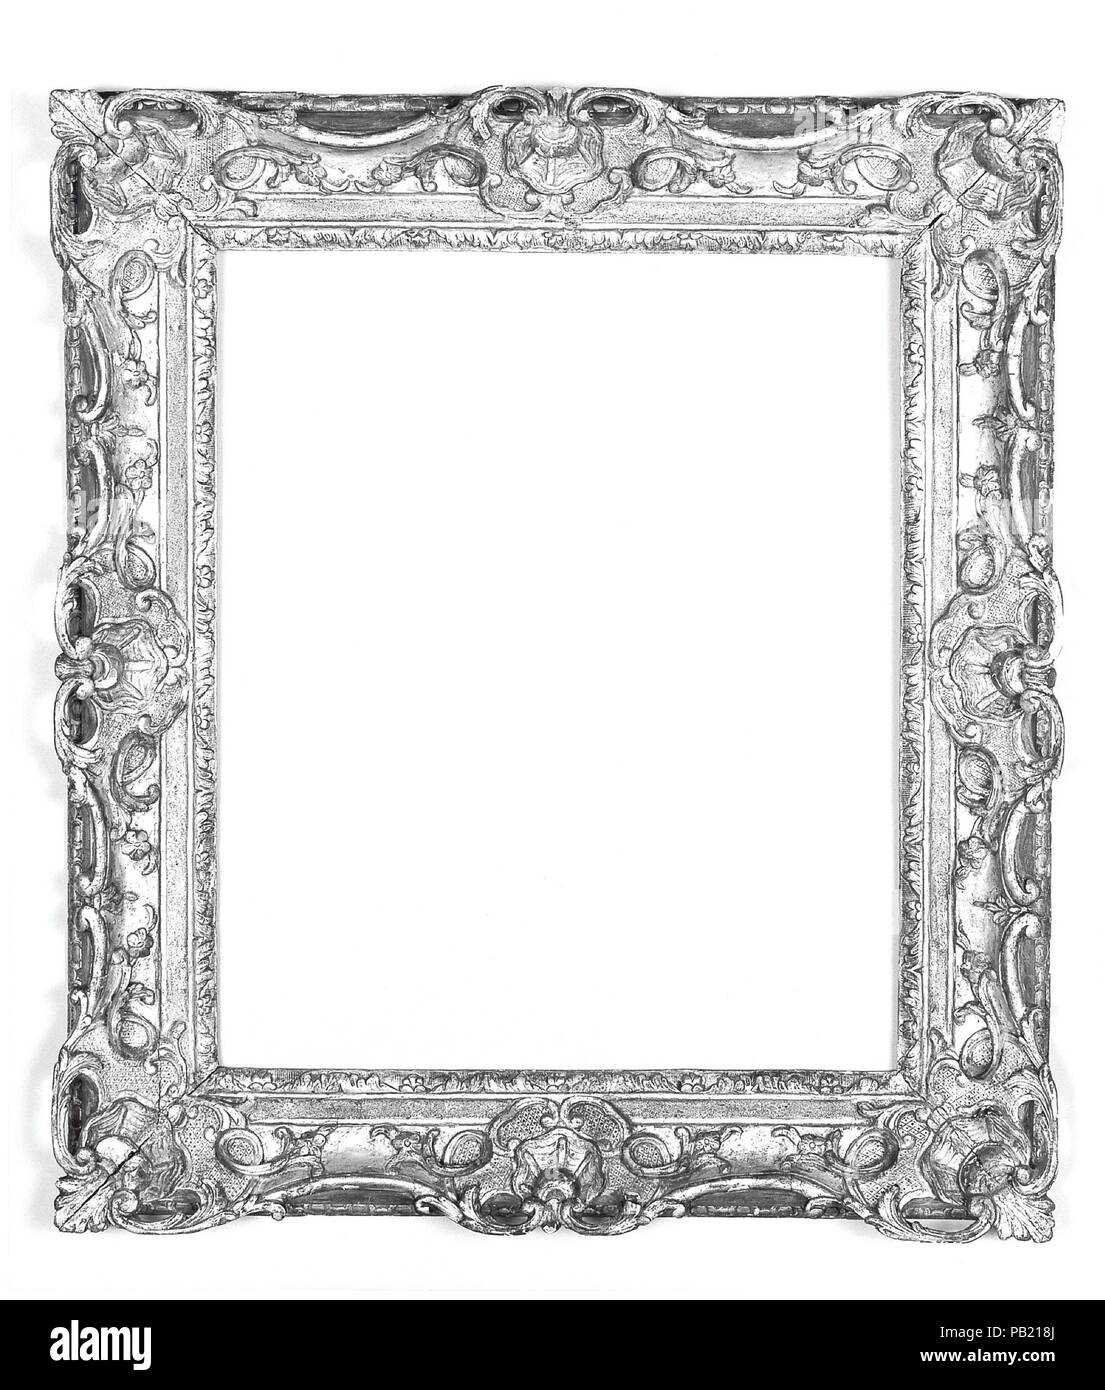 Swept frame. Culture: French. Dimensions: 77.6 x 68, 56.3 x 47, 61.5 x 49.7 cm.. Date: 1735-45. Museum: Metropolitan Museum of Art, New York, USA. Stock Photo